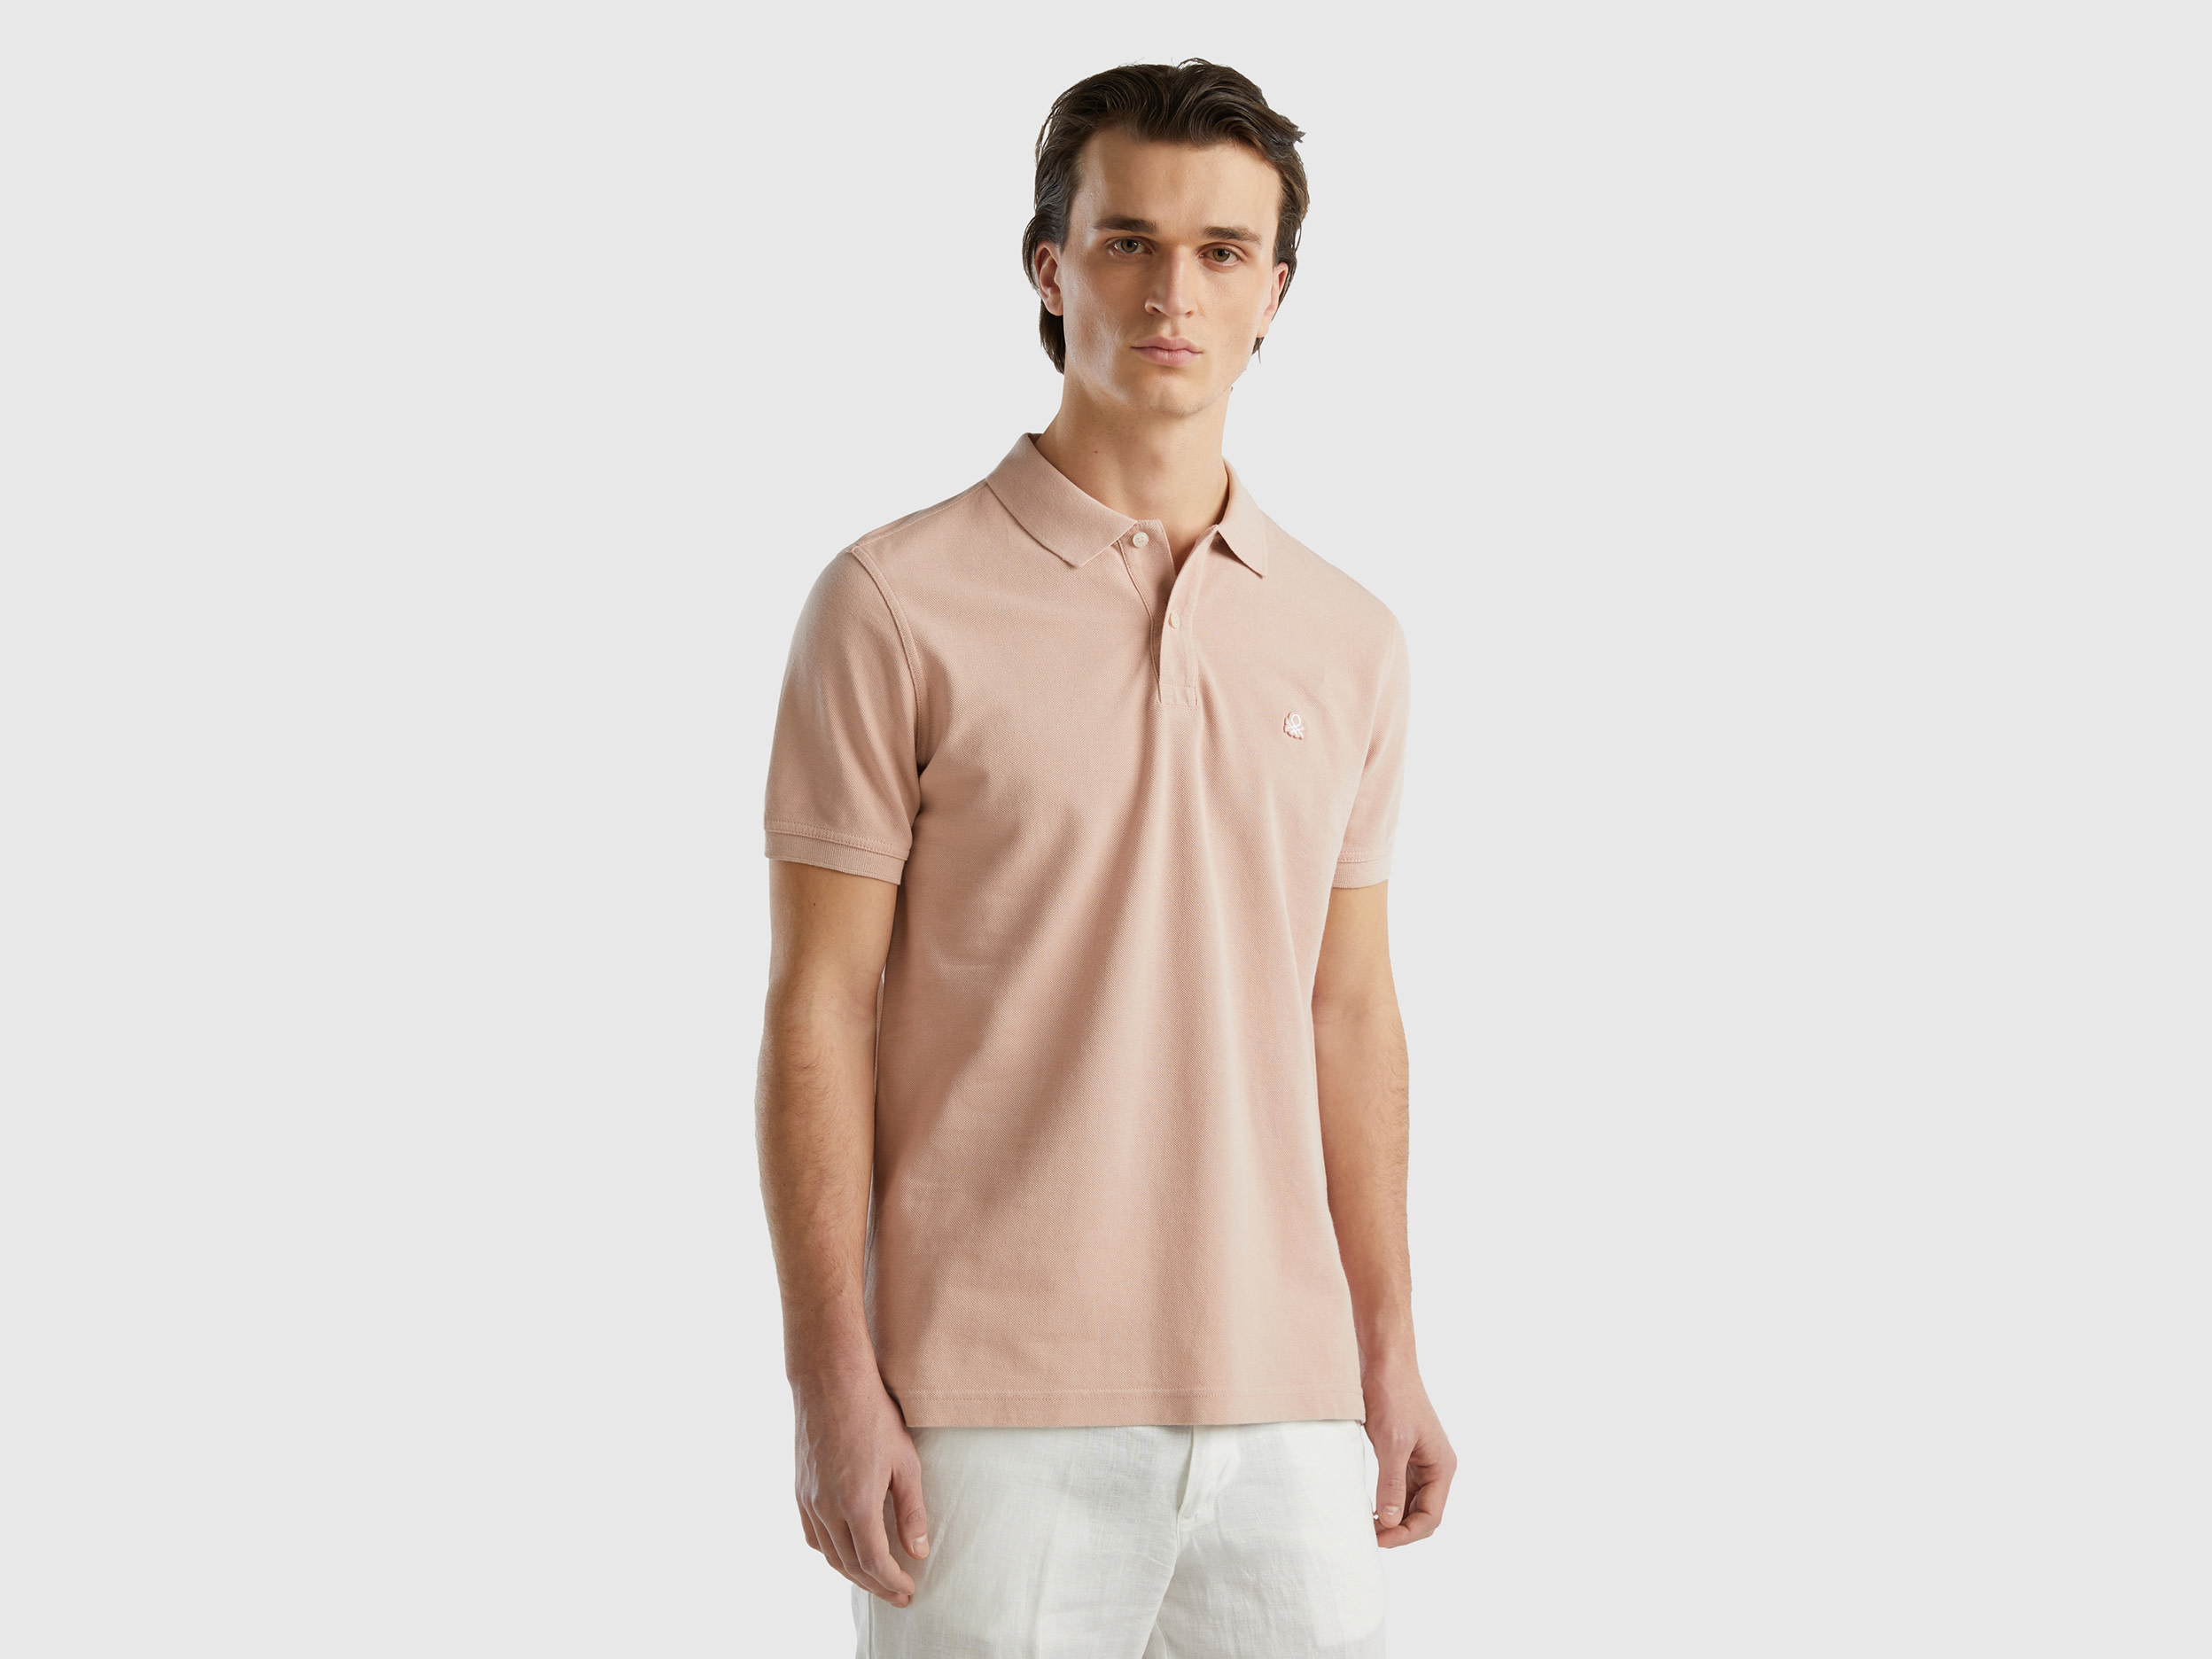 Image of Benetton, Pink Regular Fit Polo, size XS, Nude, Men